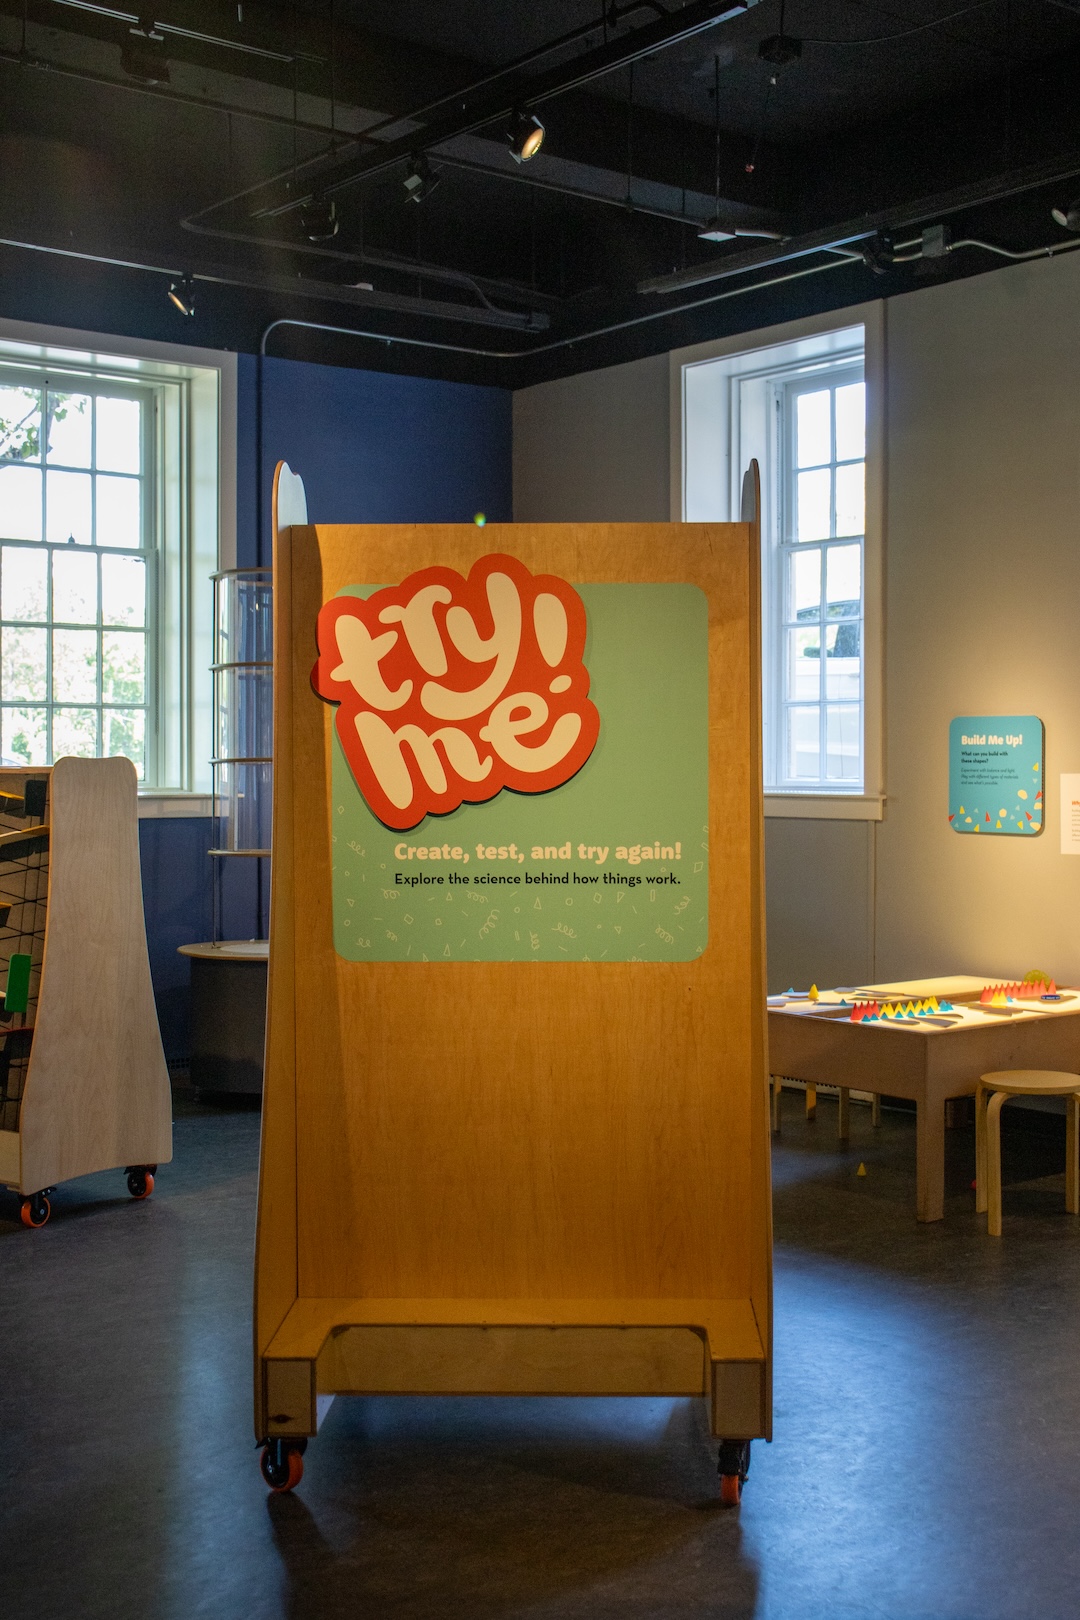 The Try Me! exhibit sign on a bright day. In the background, there are tables and other science materials.